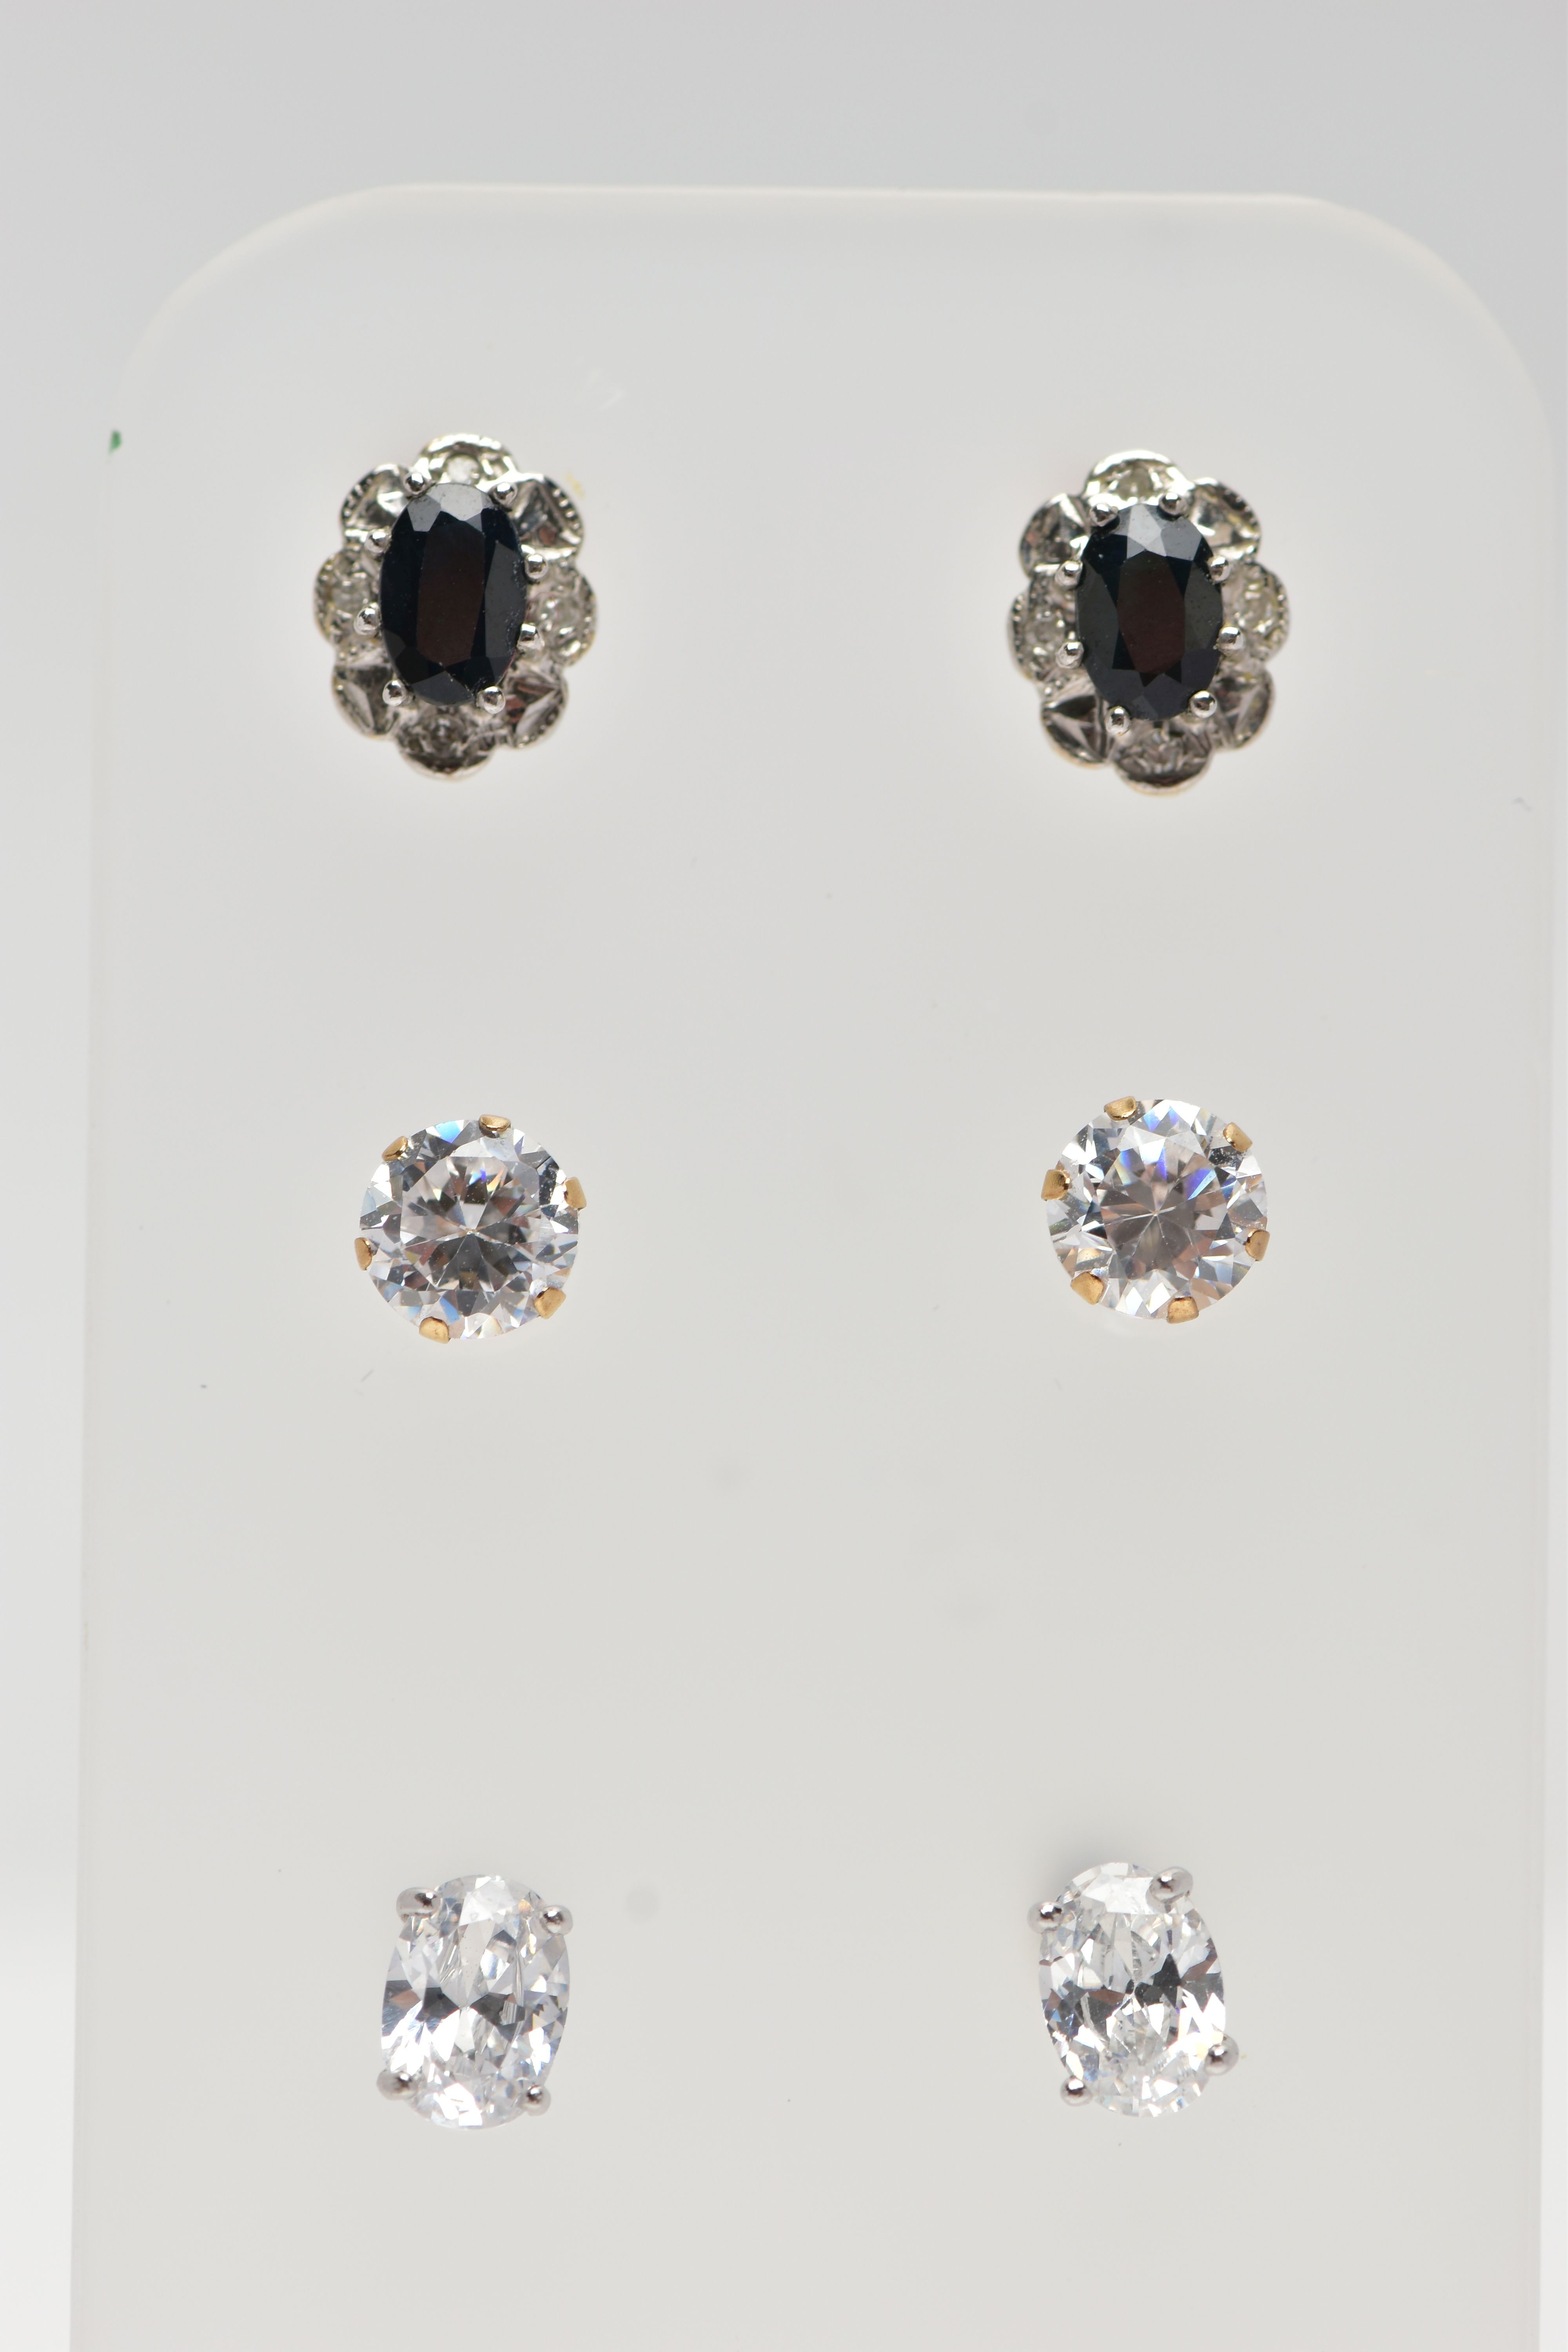 THREE PAIRS OF GEM SET EARRINGS, the first a pair of cluster stud earrings, set with an oval cut